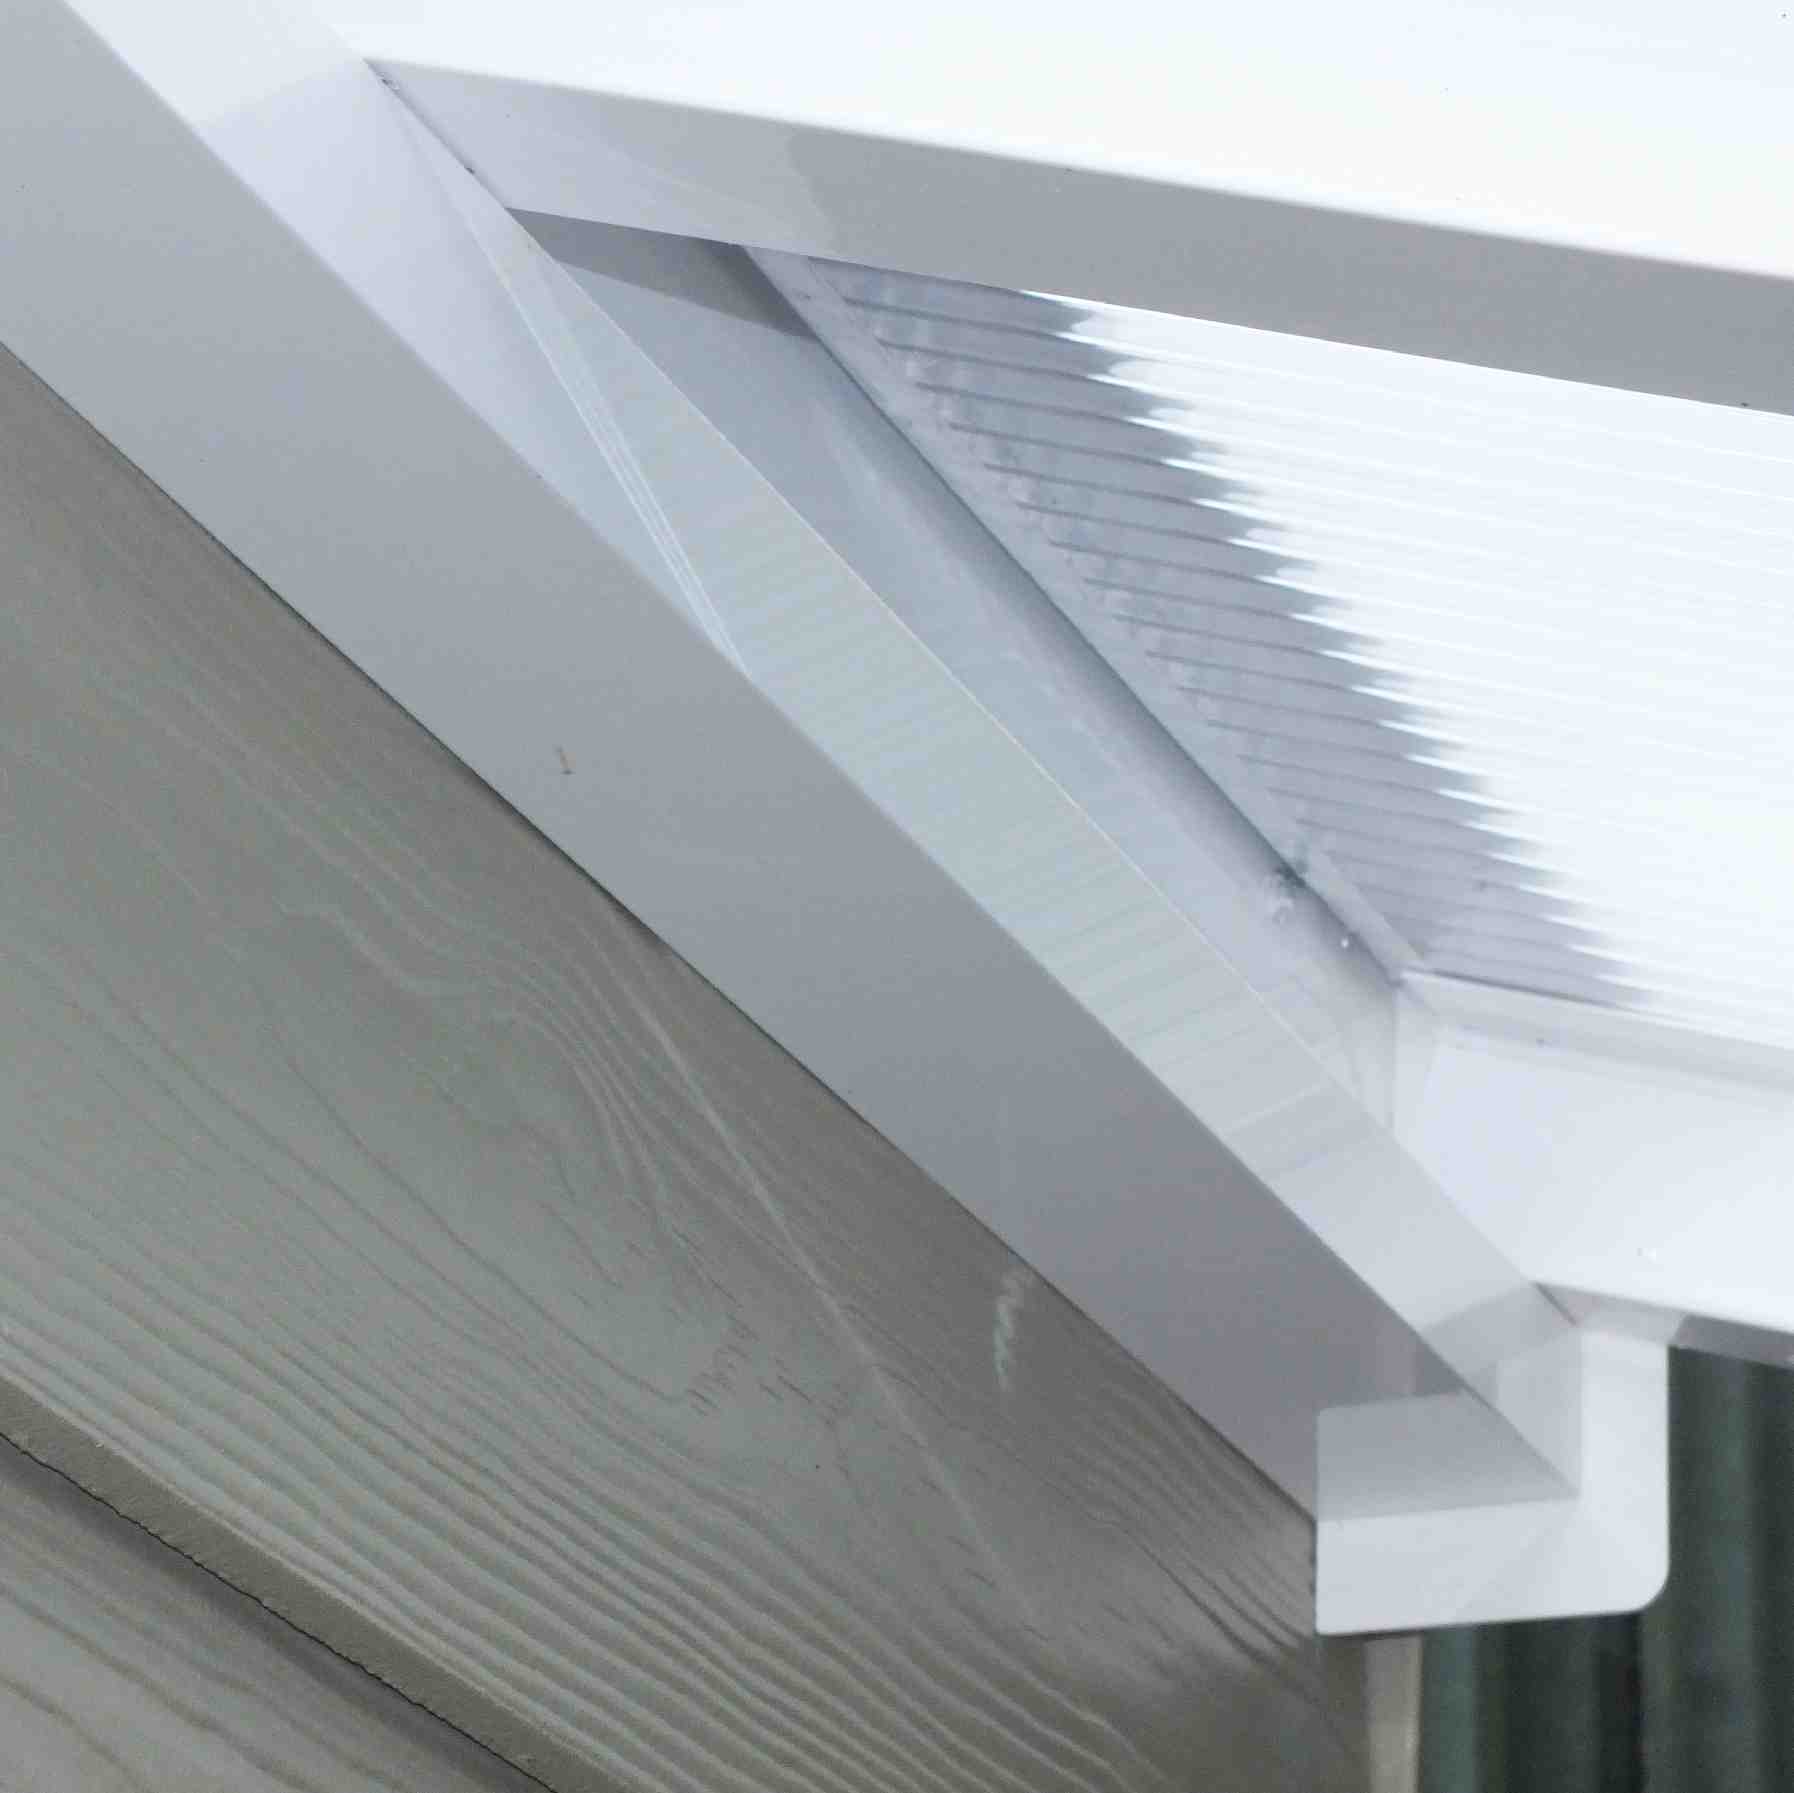 Great deals on Omega Verandah White with 6mm Glass Clear Plate Polycarbonate Glazing - 7.7m (W) x 2.5m (P), (4) Supporting Posts